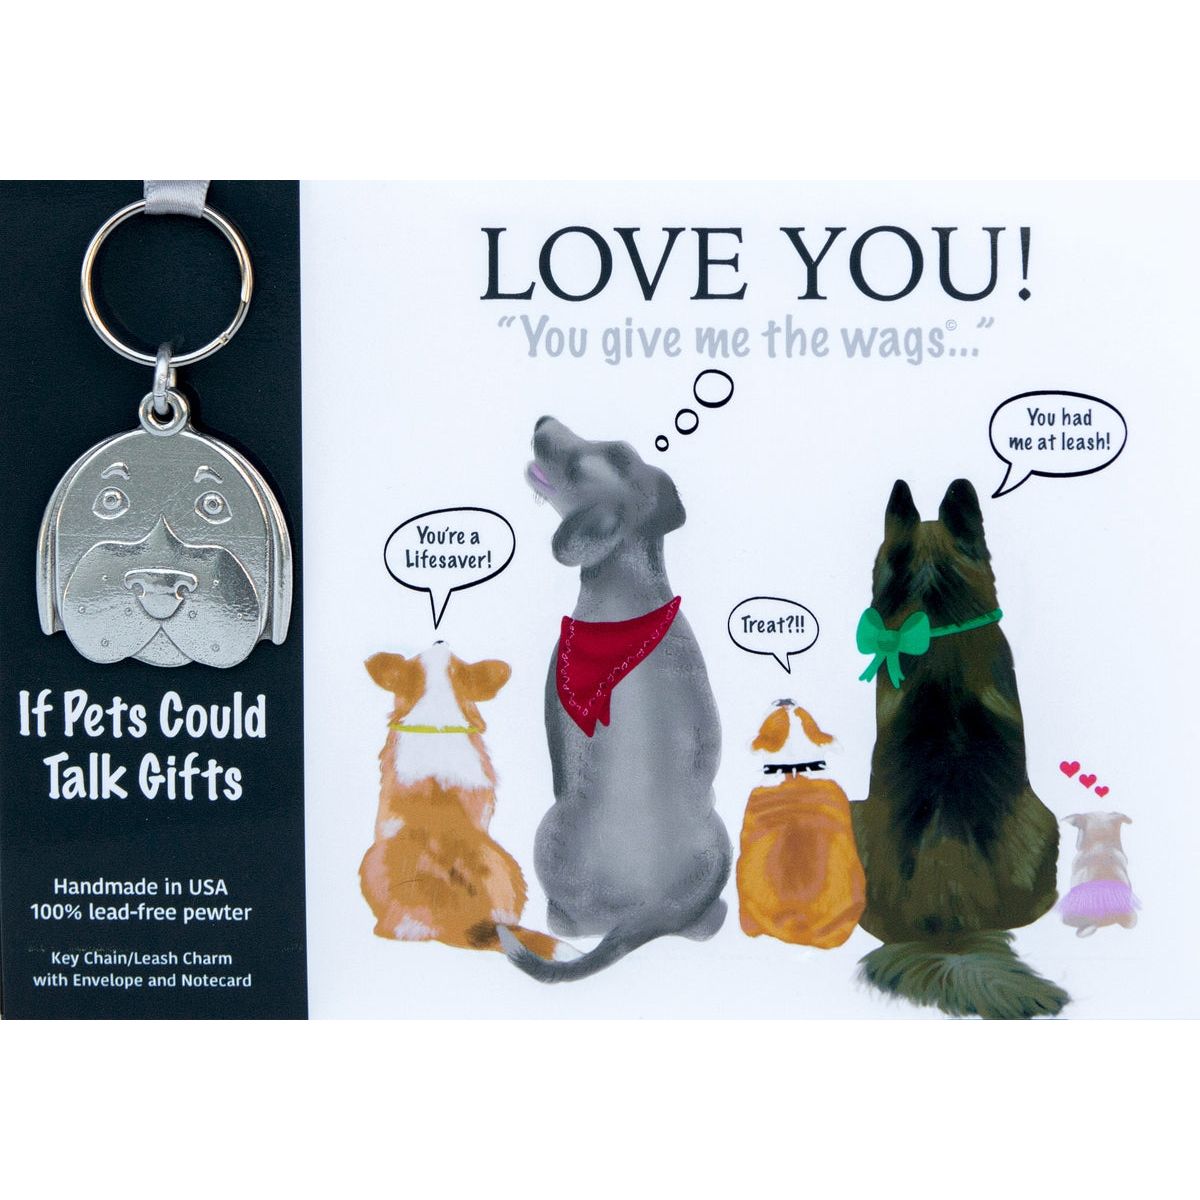 Pewter keychain in shape of a dog&#39;s face packaged with a &quot;Love You&quot; card.